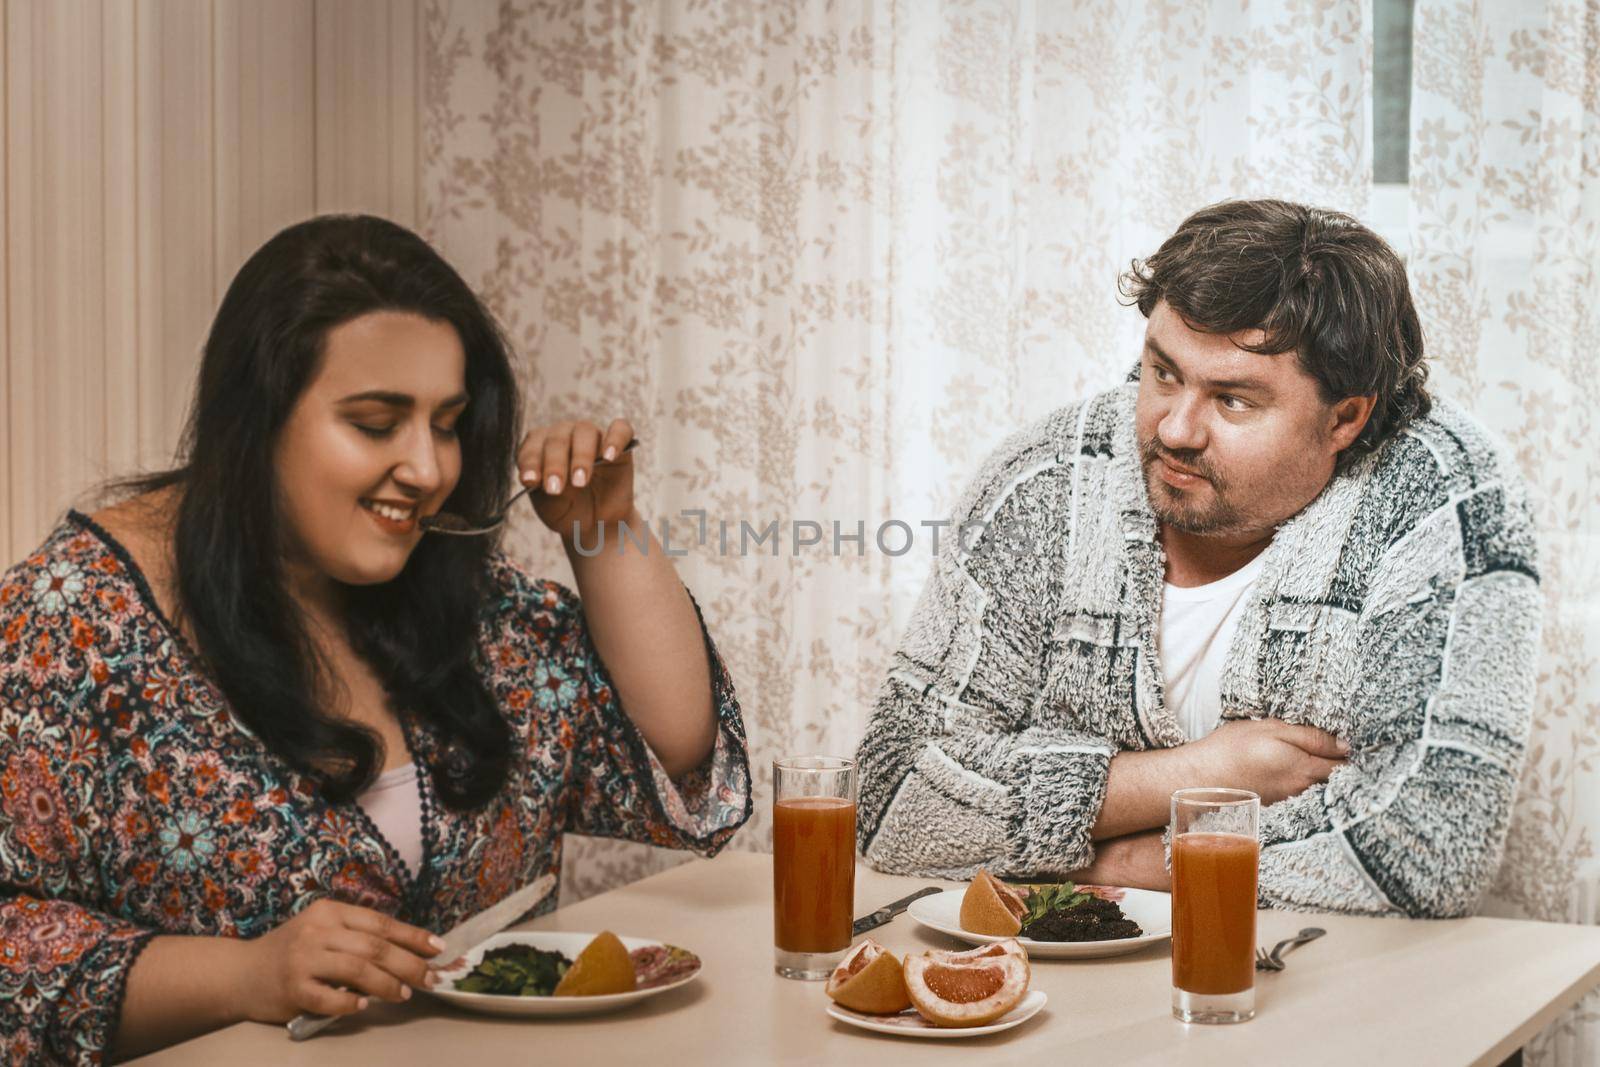 Plus Size Couple About To Eat Healthy Food, Selective Focus On Man In Casual Clothes Looking On Woman Holding Fork In Foreground And Testing Salad From Plate